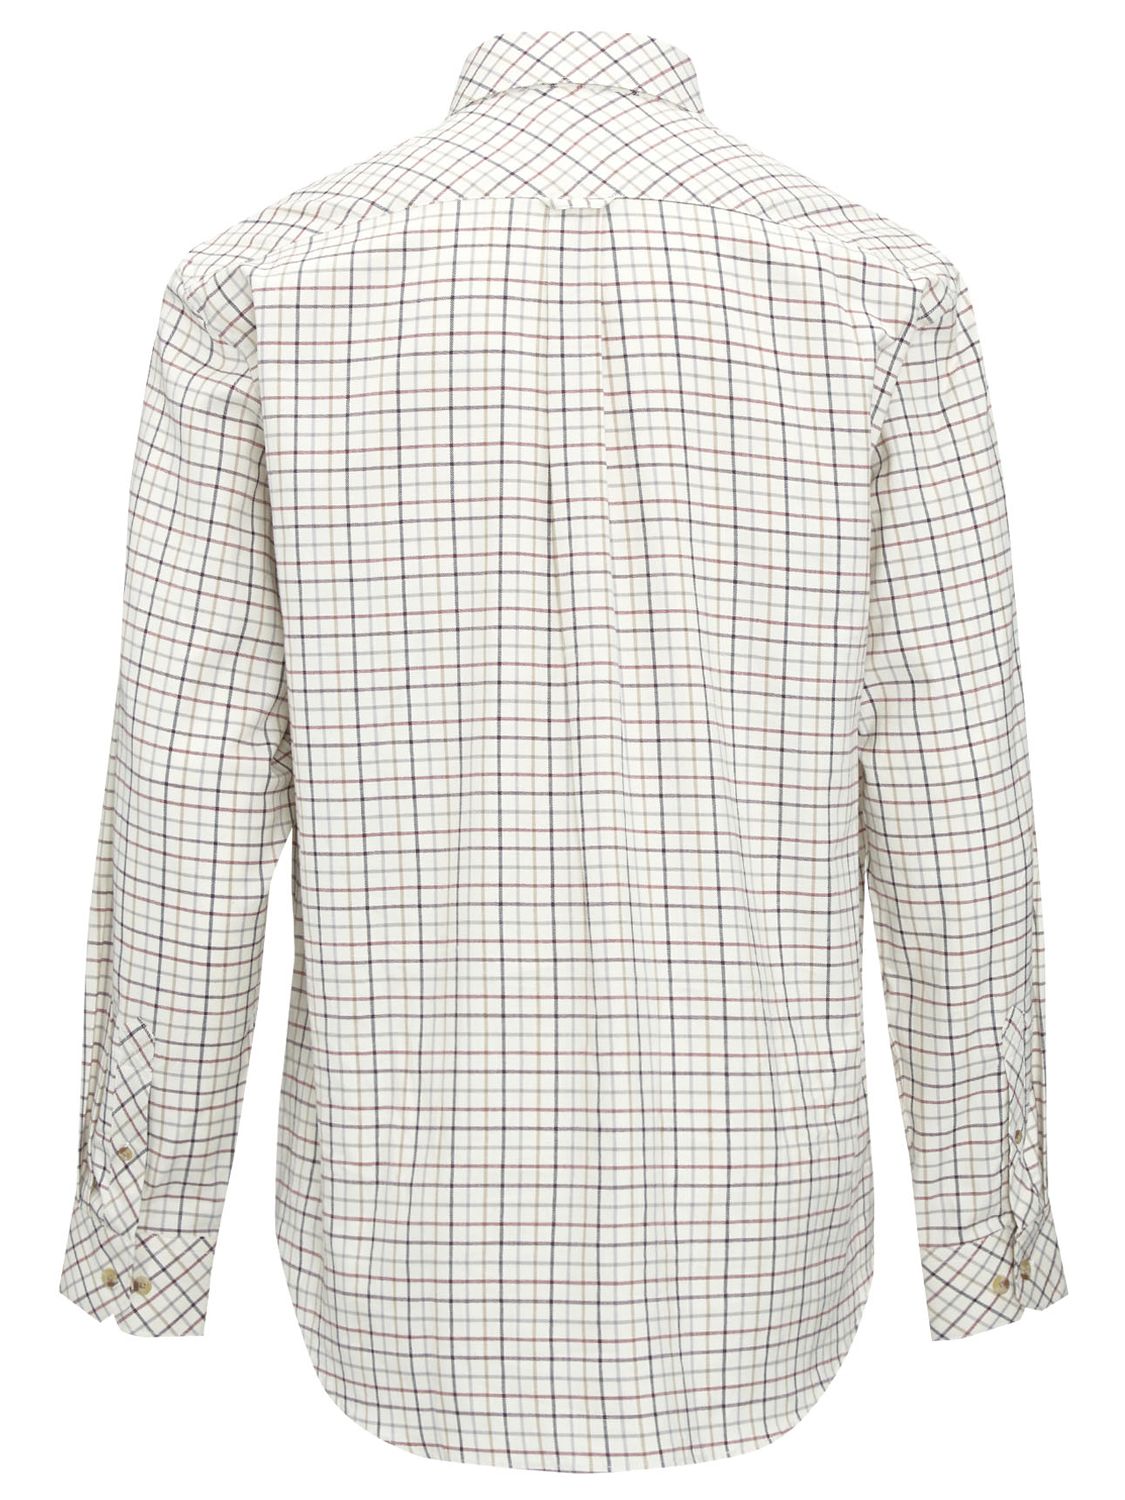 Barbour Scotland Loose Check Shirt, Red